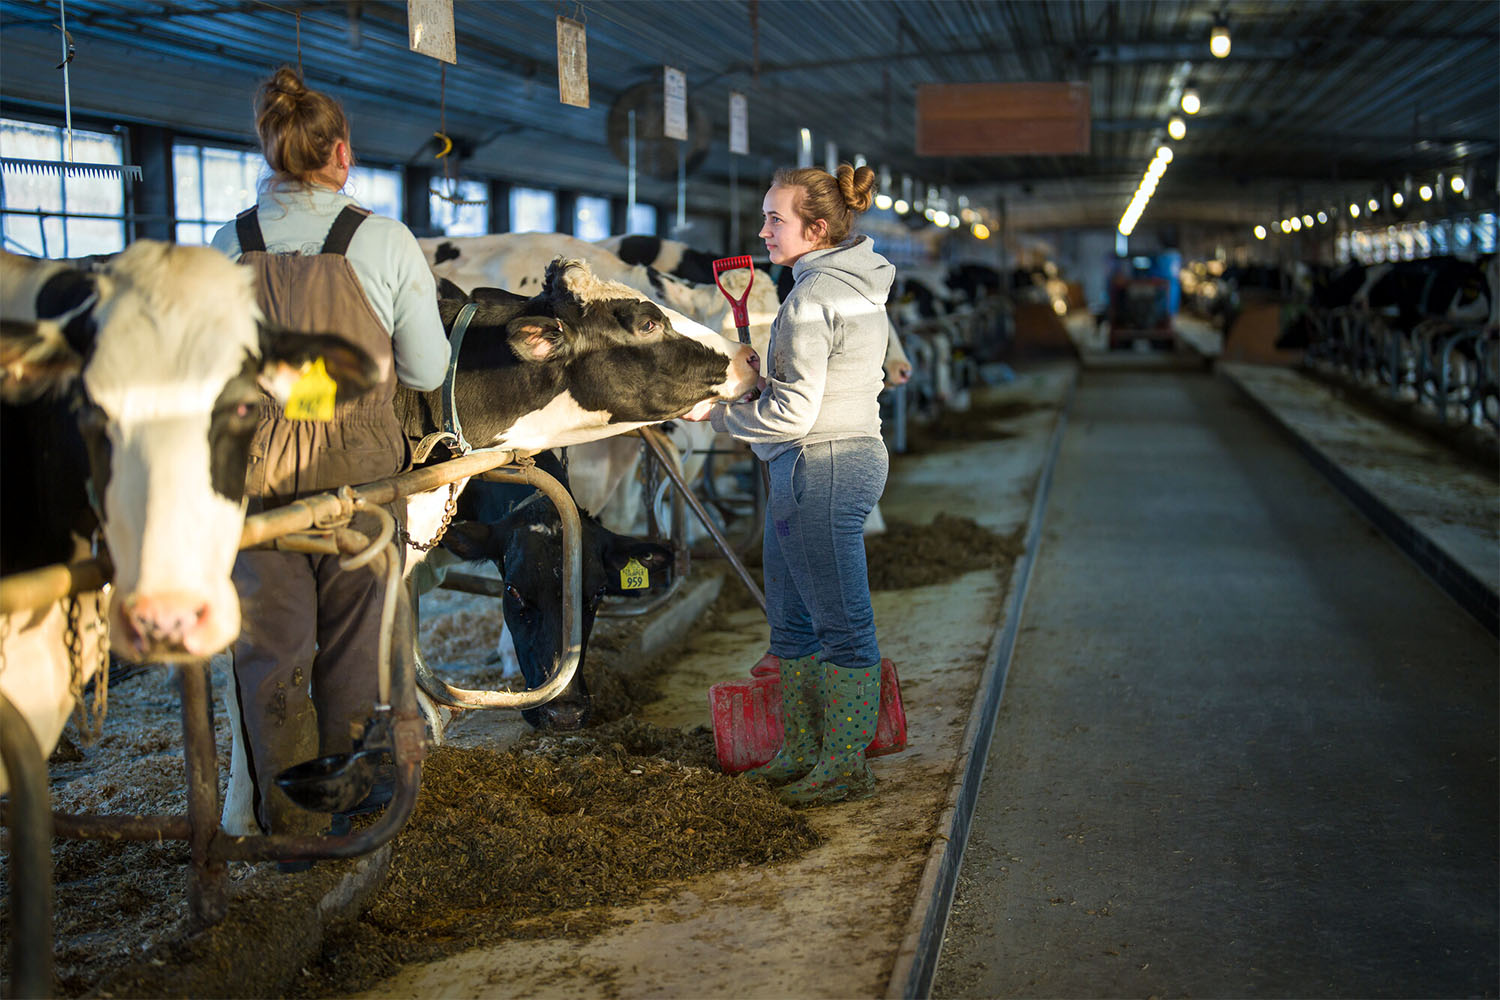 A photo of two white women with blonde-brown hair standing next to black and white Holstein cows talking. One holds a shovel and wears a grey sweatshirt and jeans. The other stands between two cows and has on coveralls.